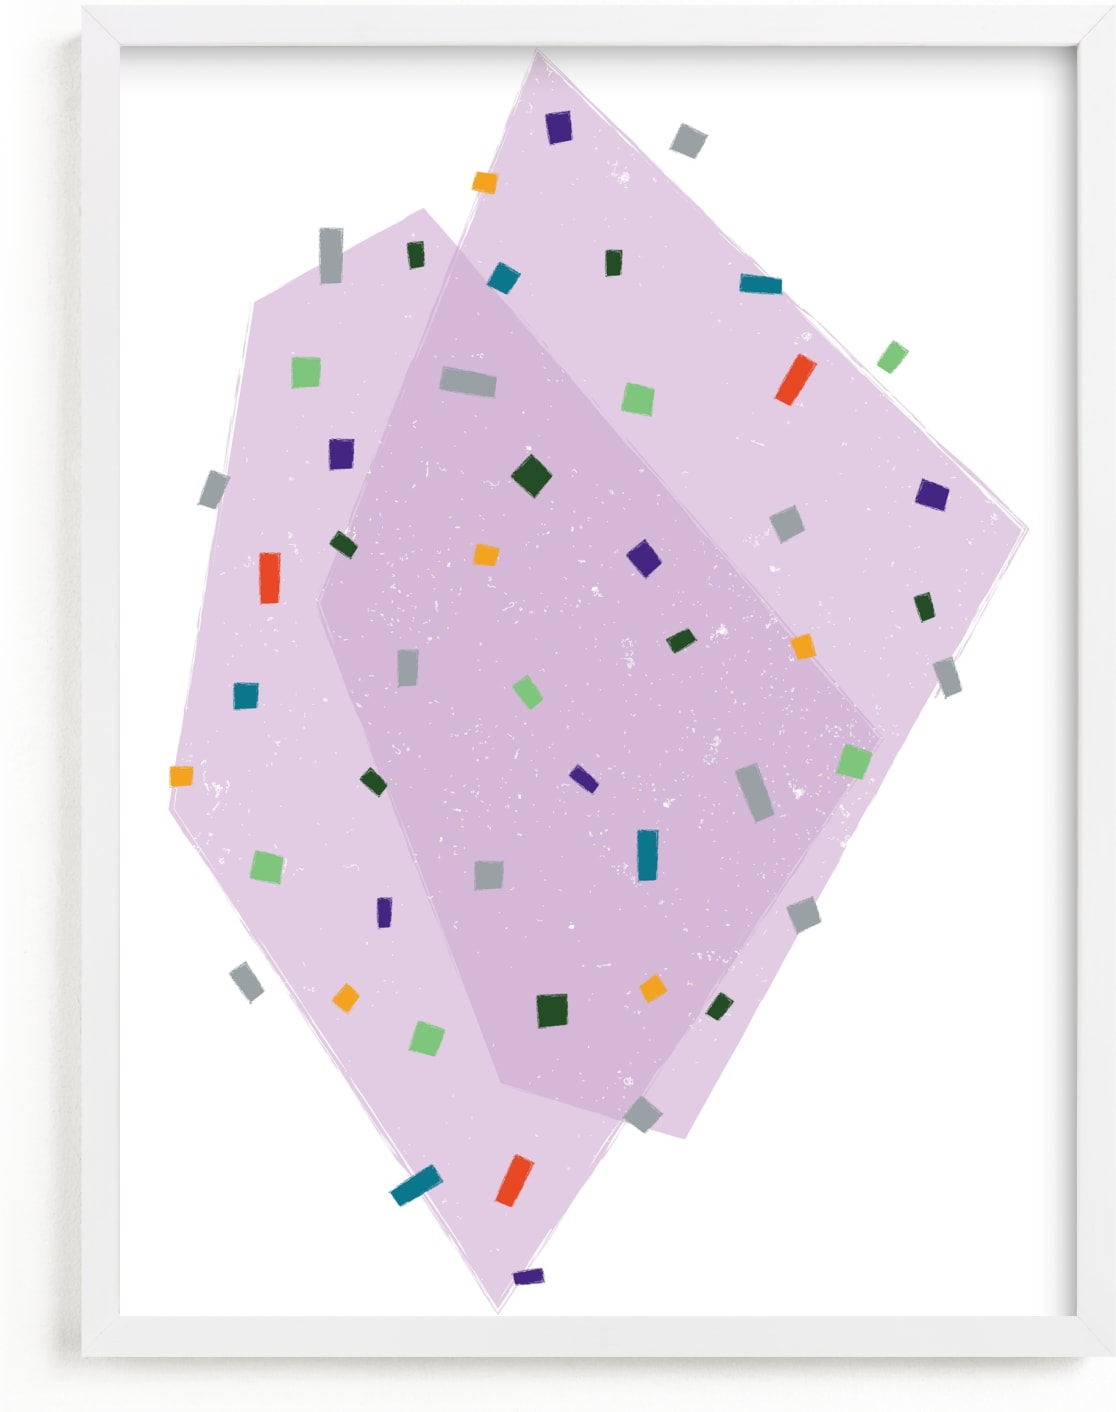 This is a silver kids wall art by Kanika Mathur called Mod Terrazzo.